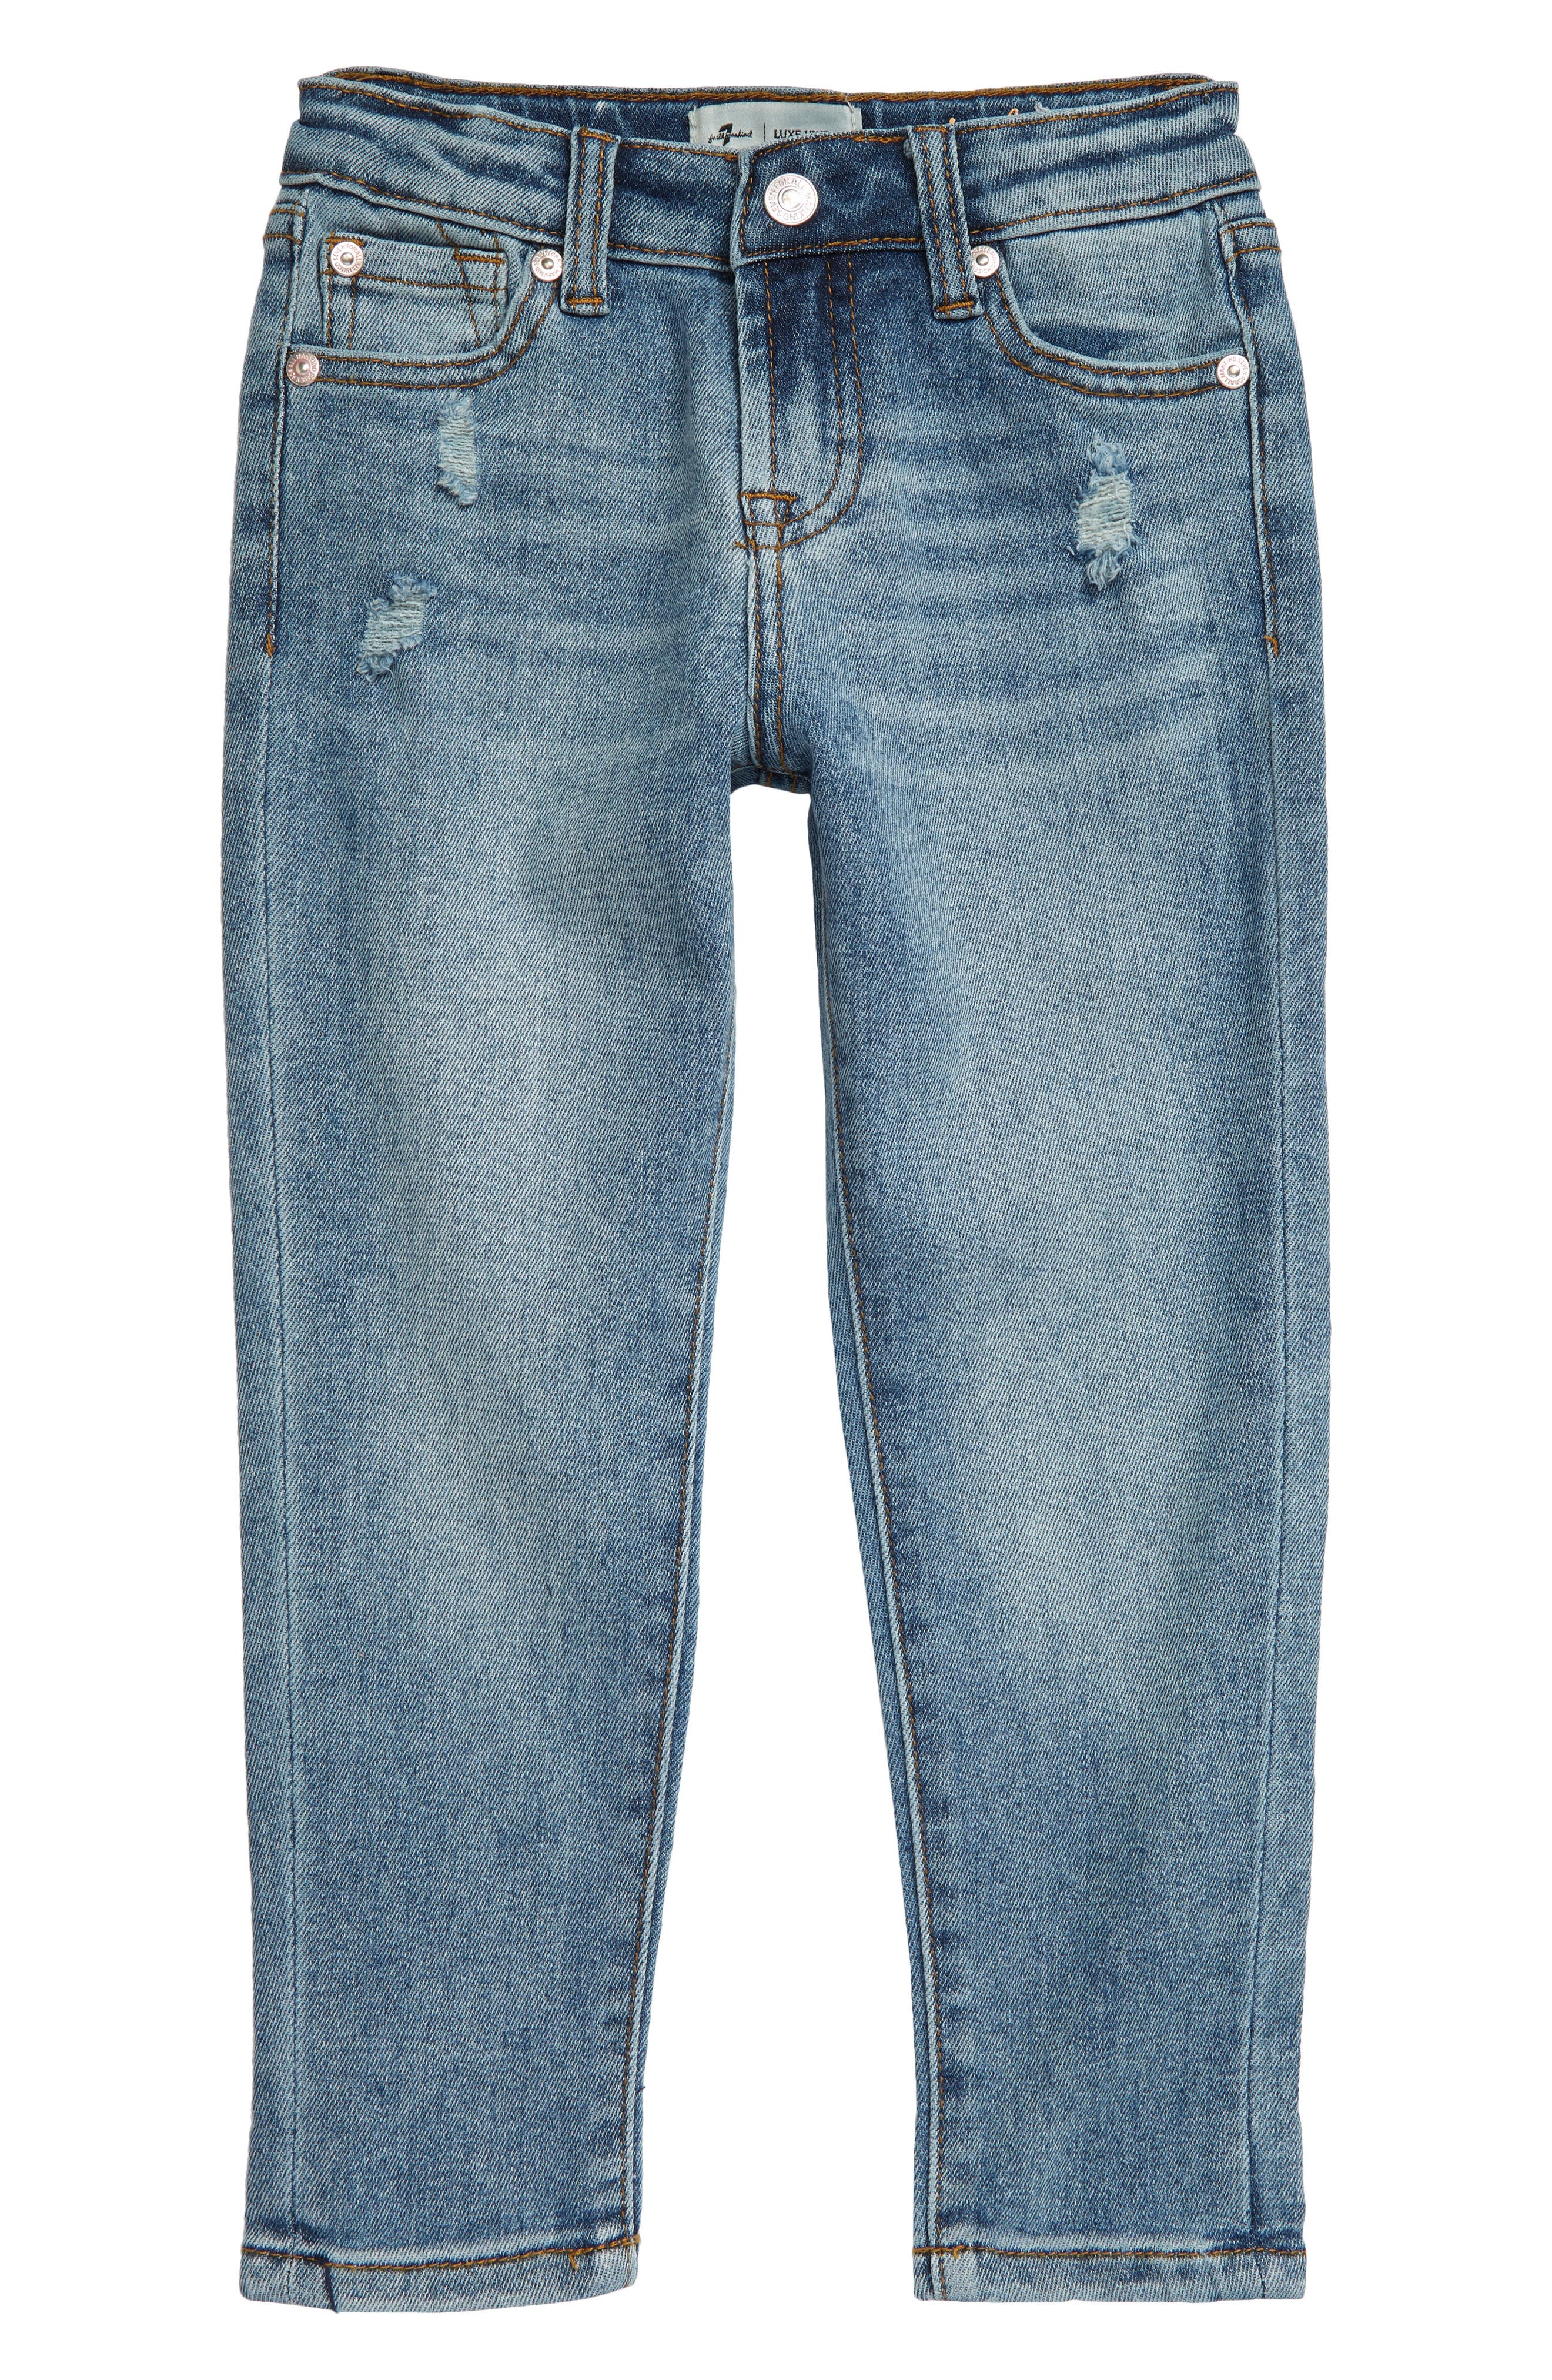 7 for all mankind boys jeans